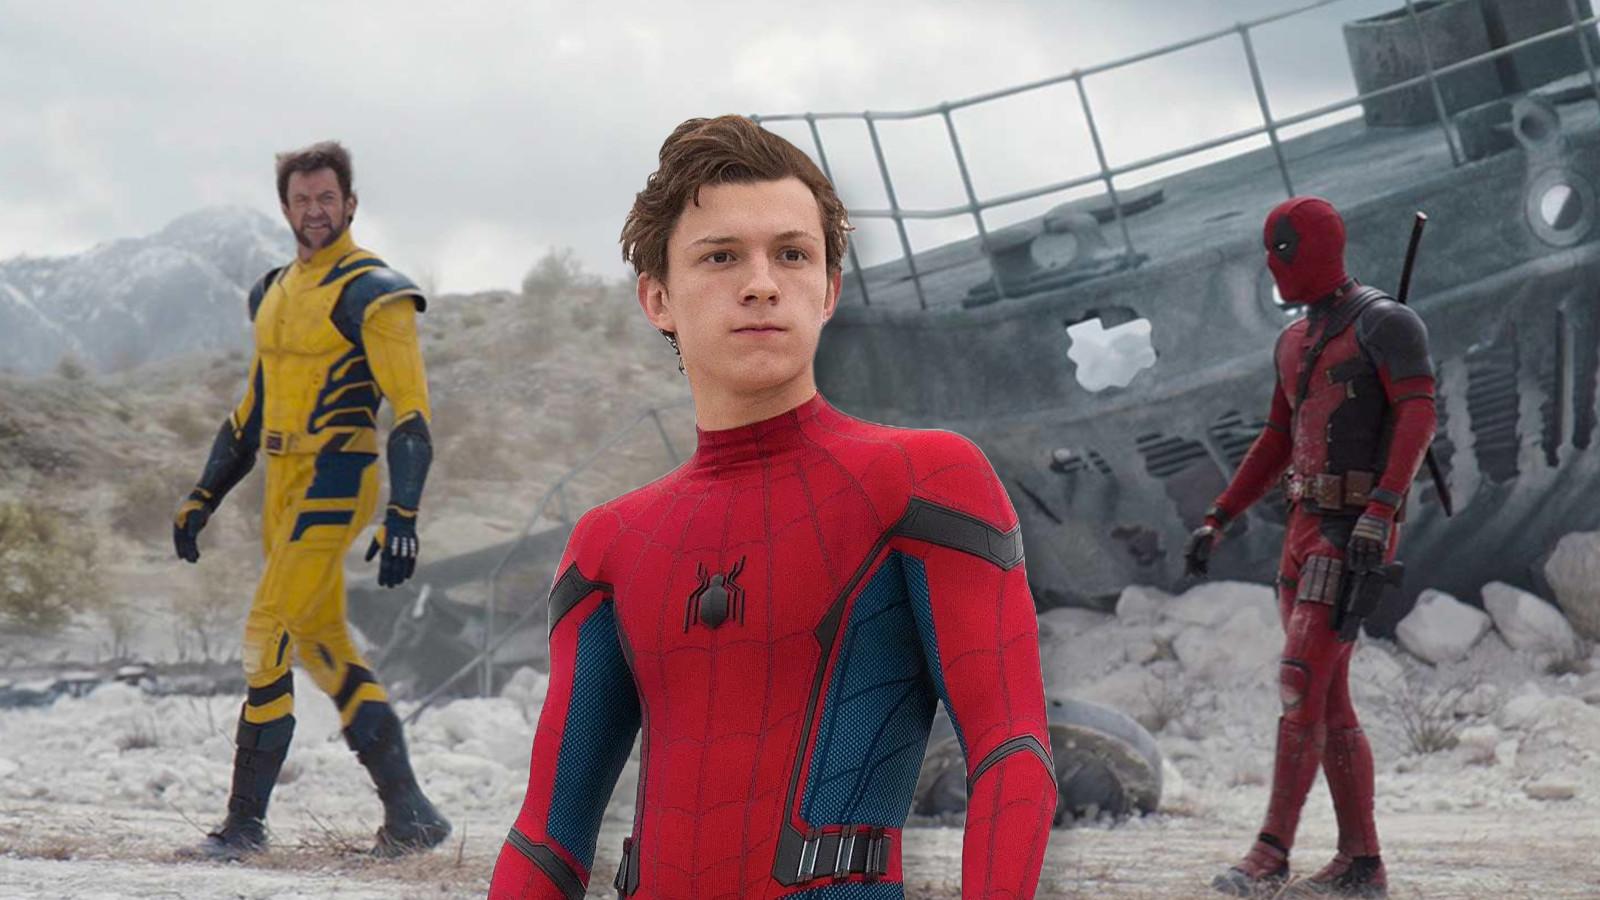 Tom Holland as Spider-Man with Deadpool and Wolverine walking around in the background